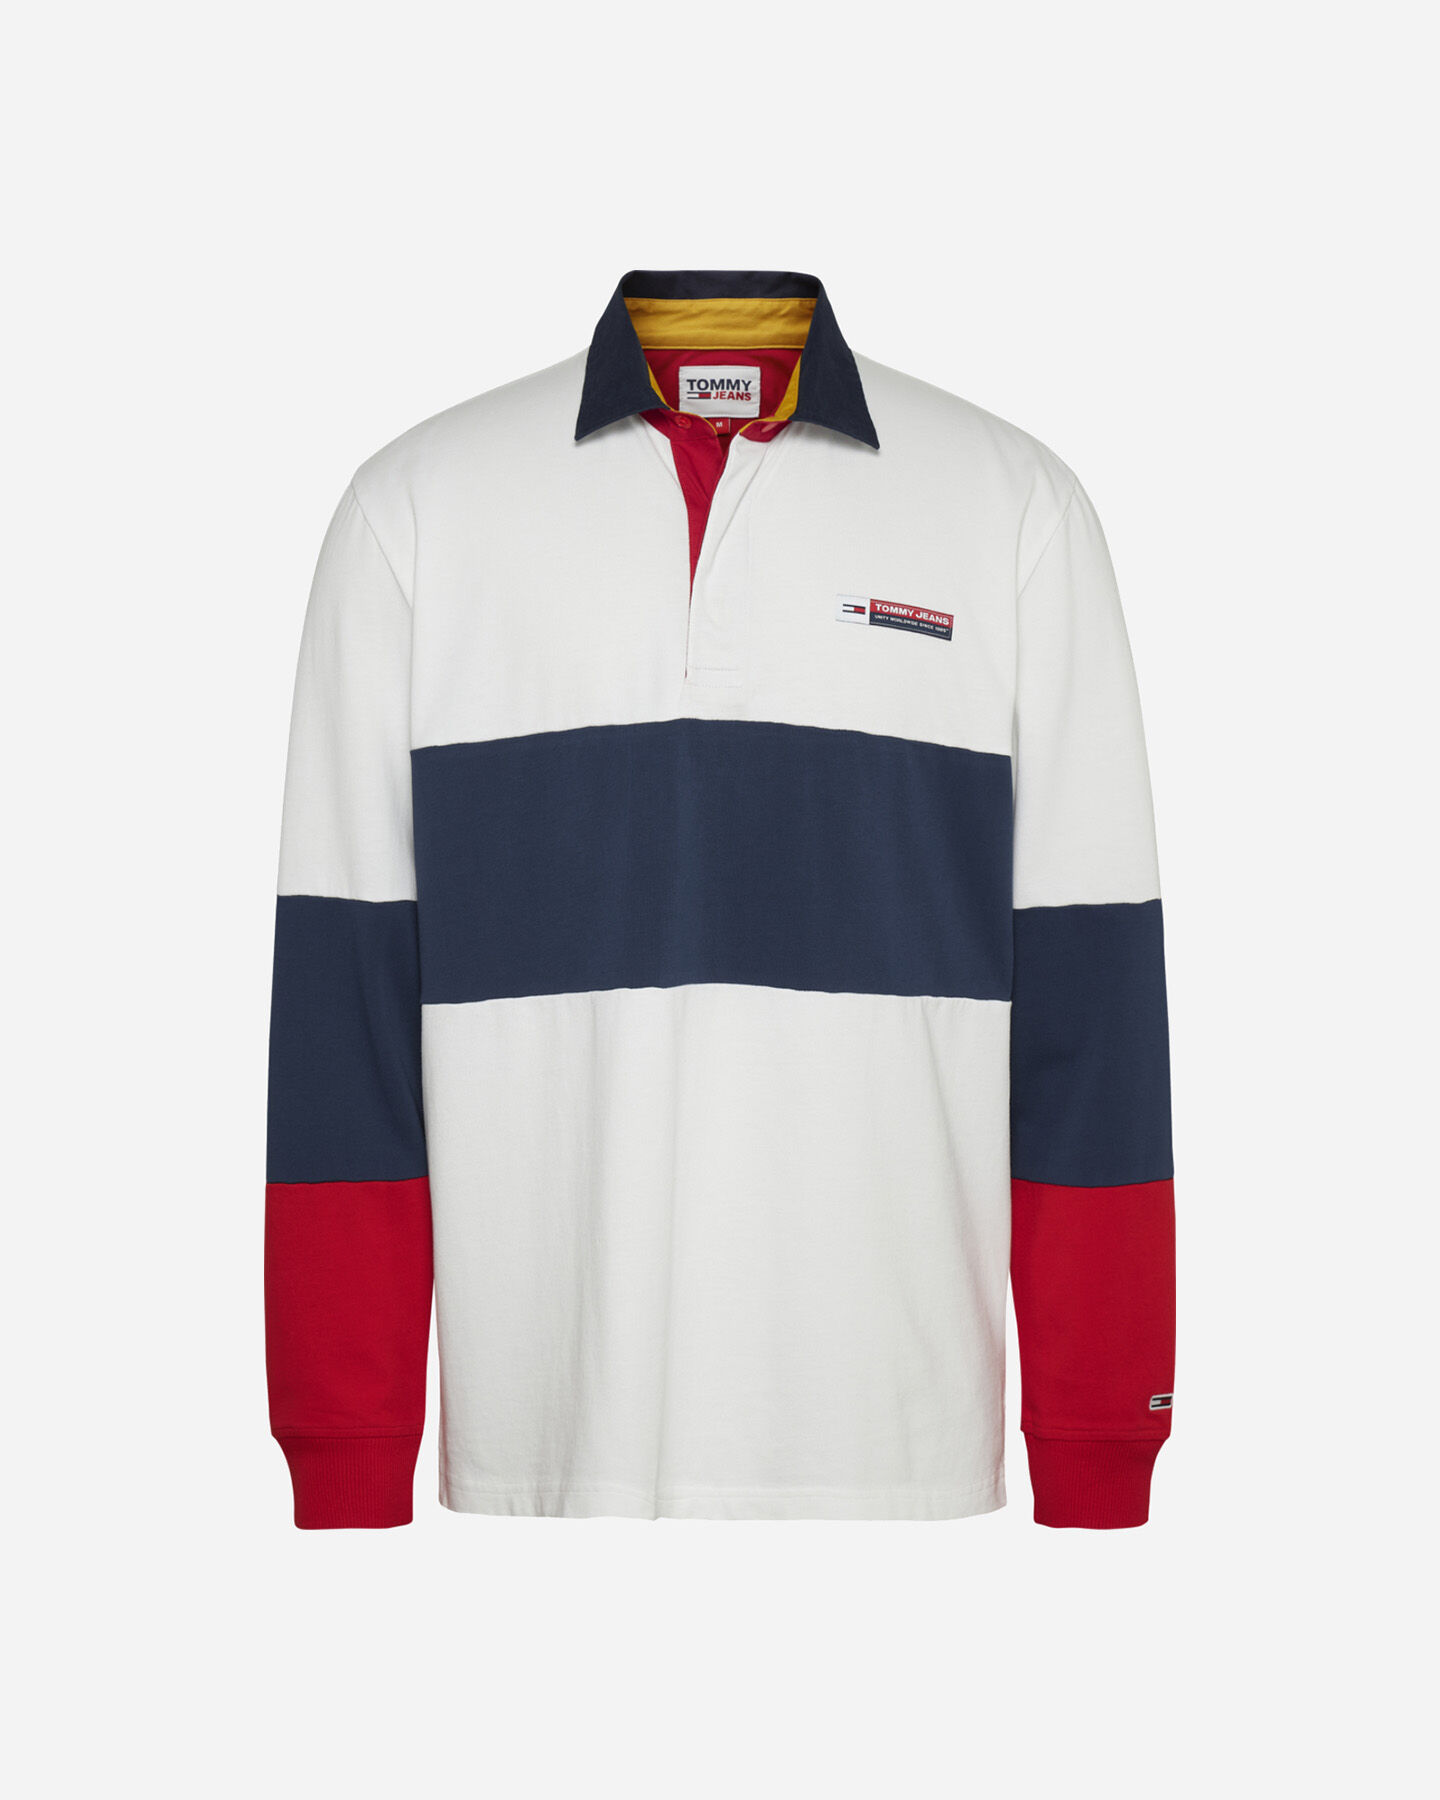  Polo TOMMY HILFIGER COLOR BLOCK M S4105017|YBR|XS scatto 0